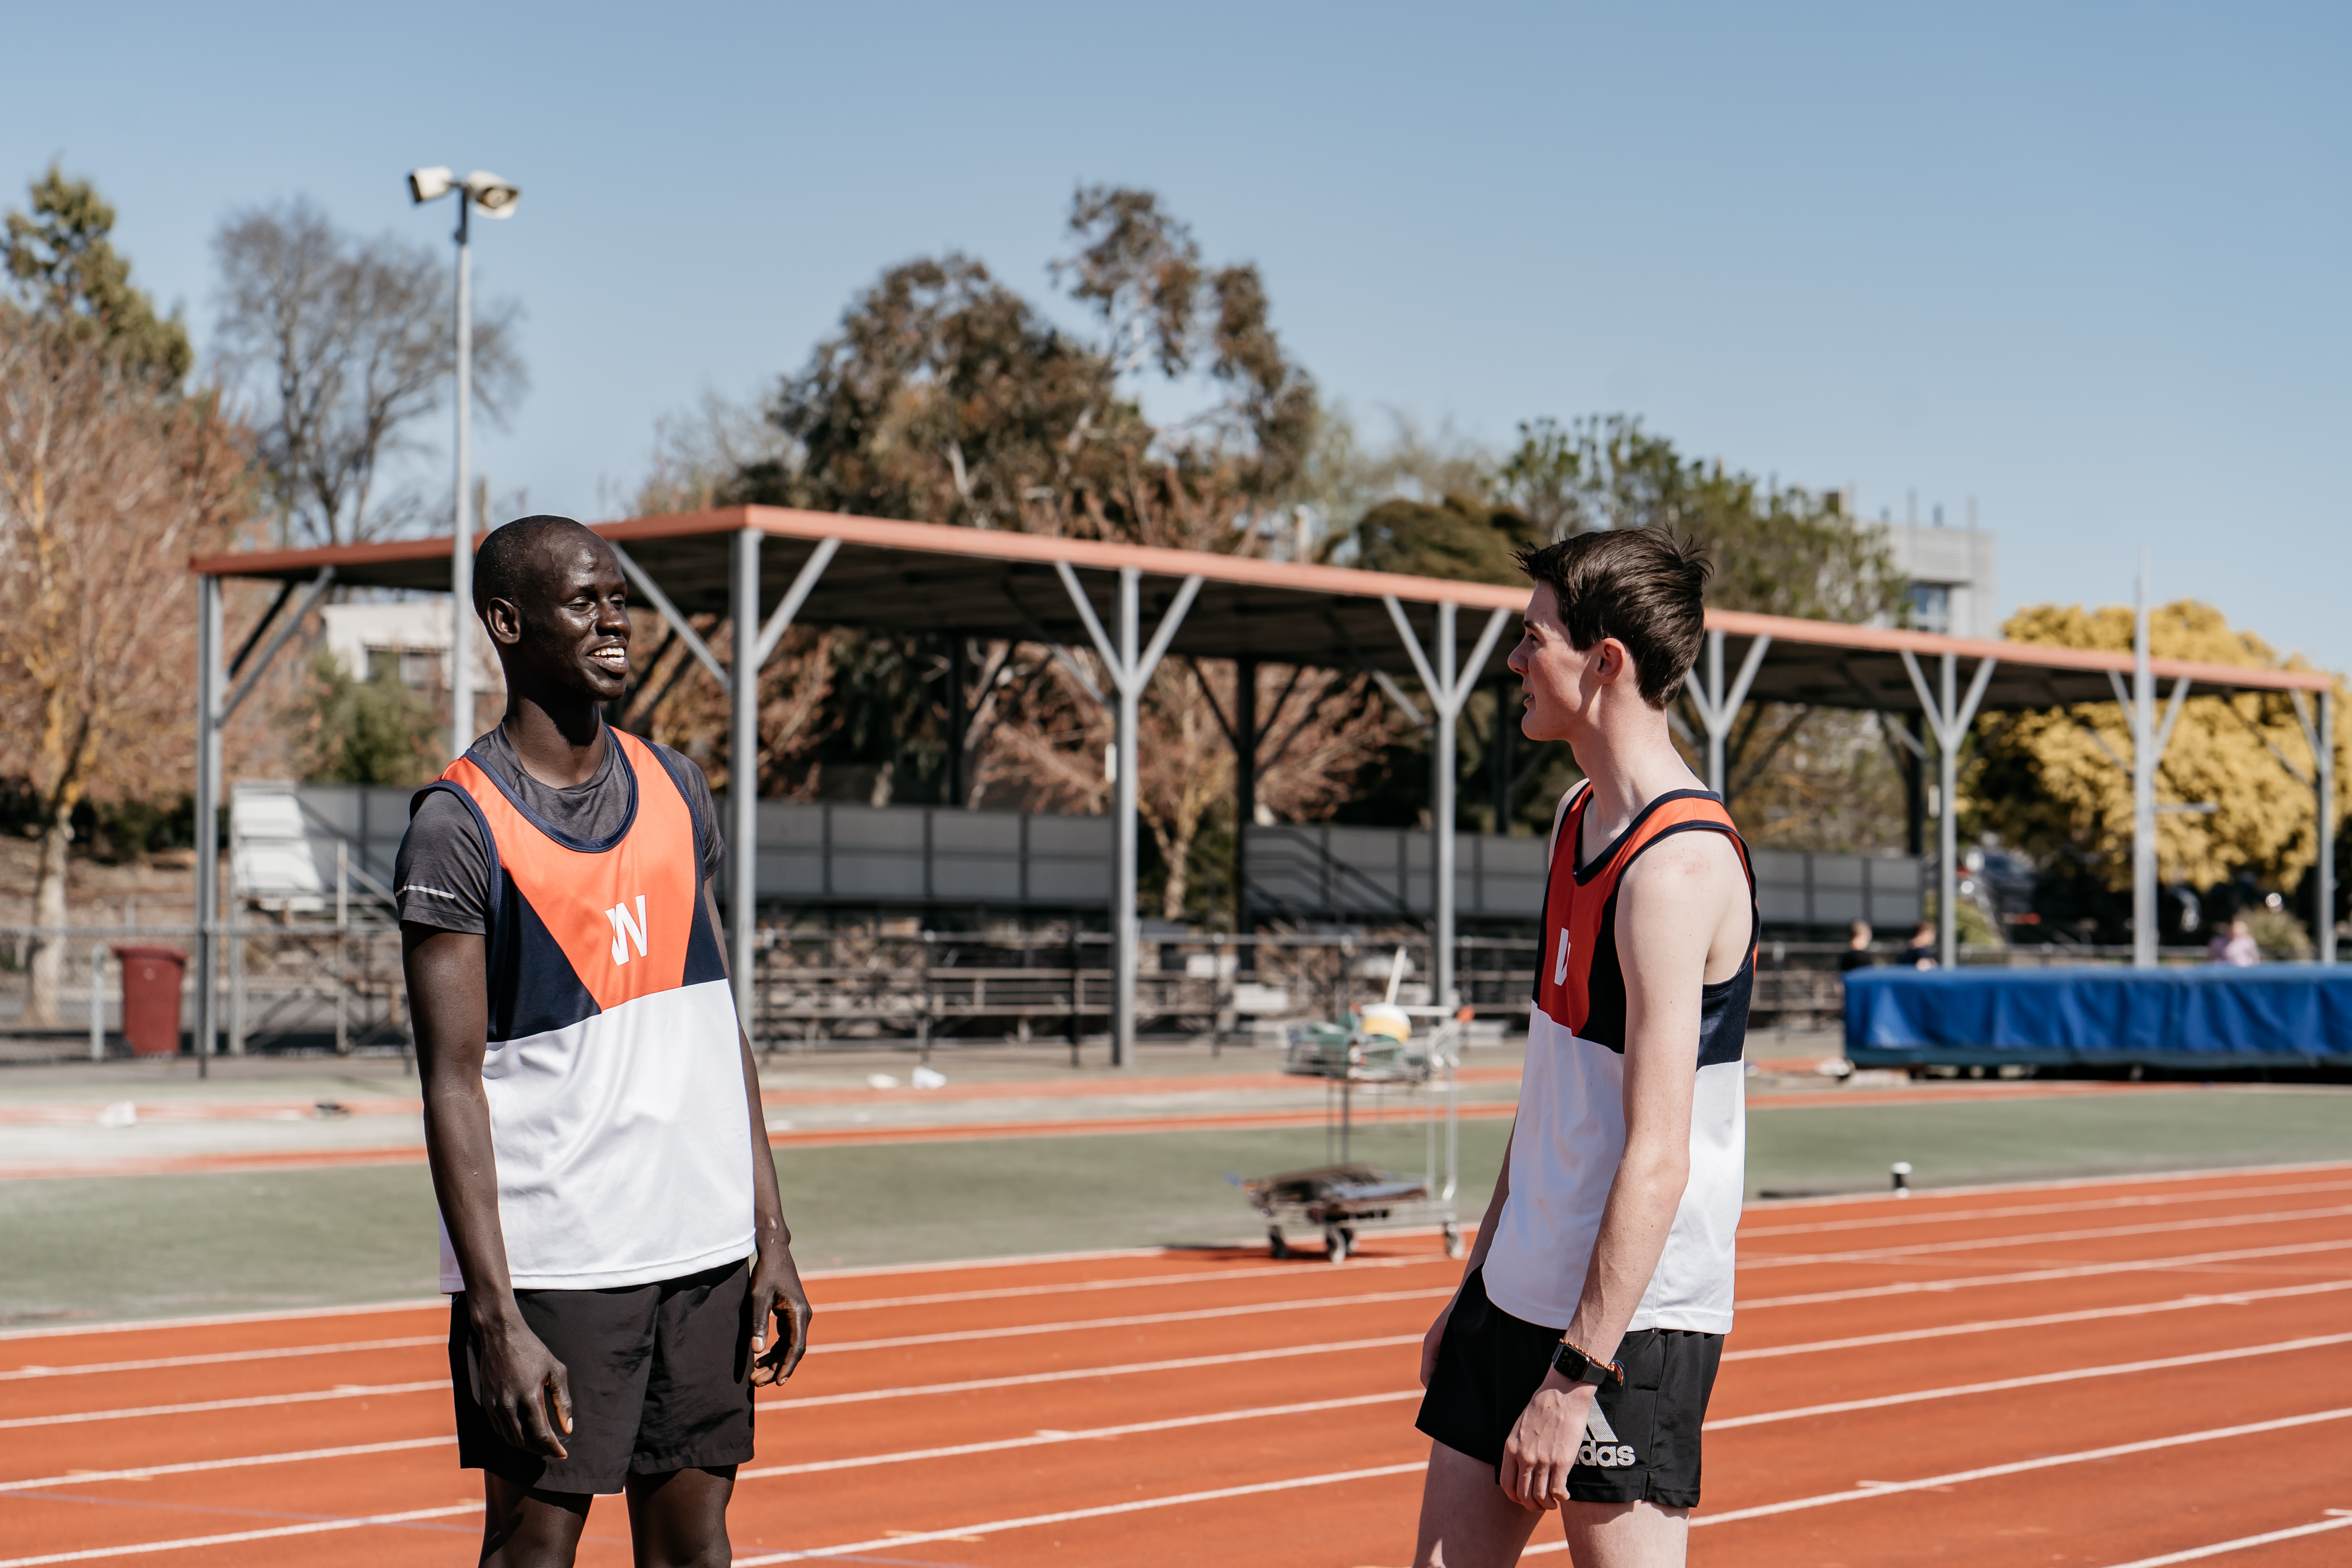 two young men on an athletics running track